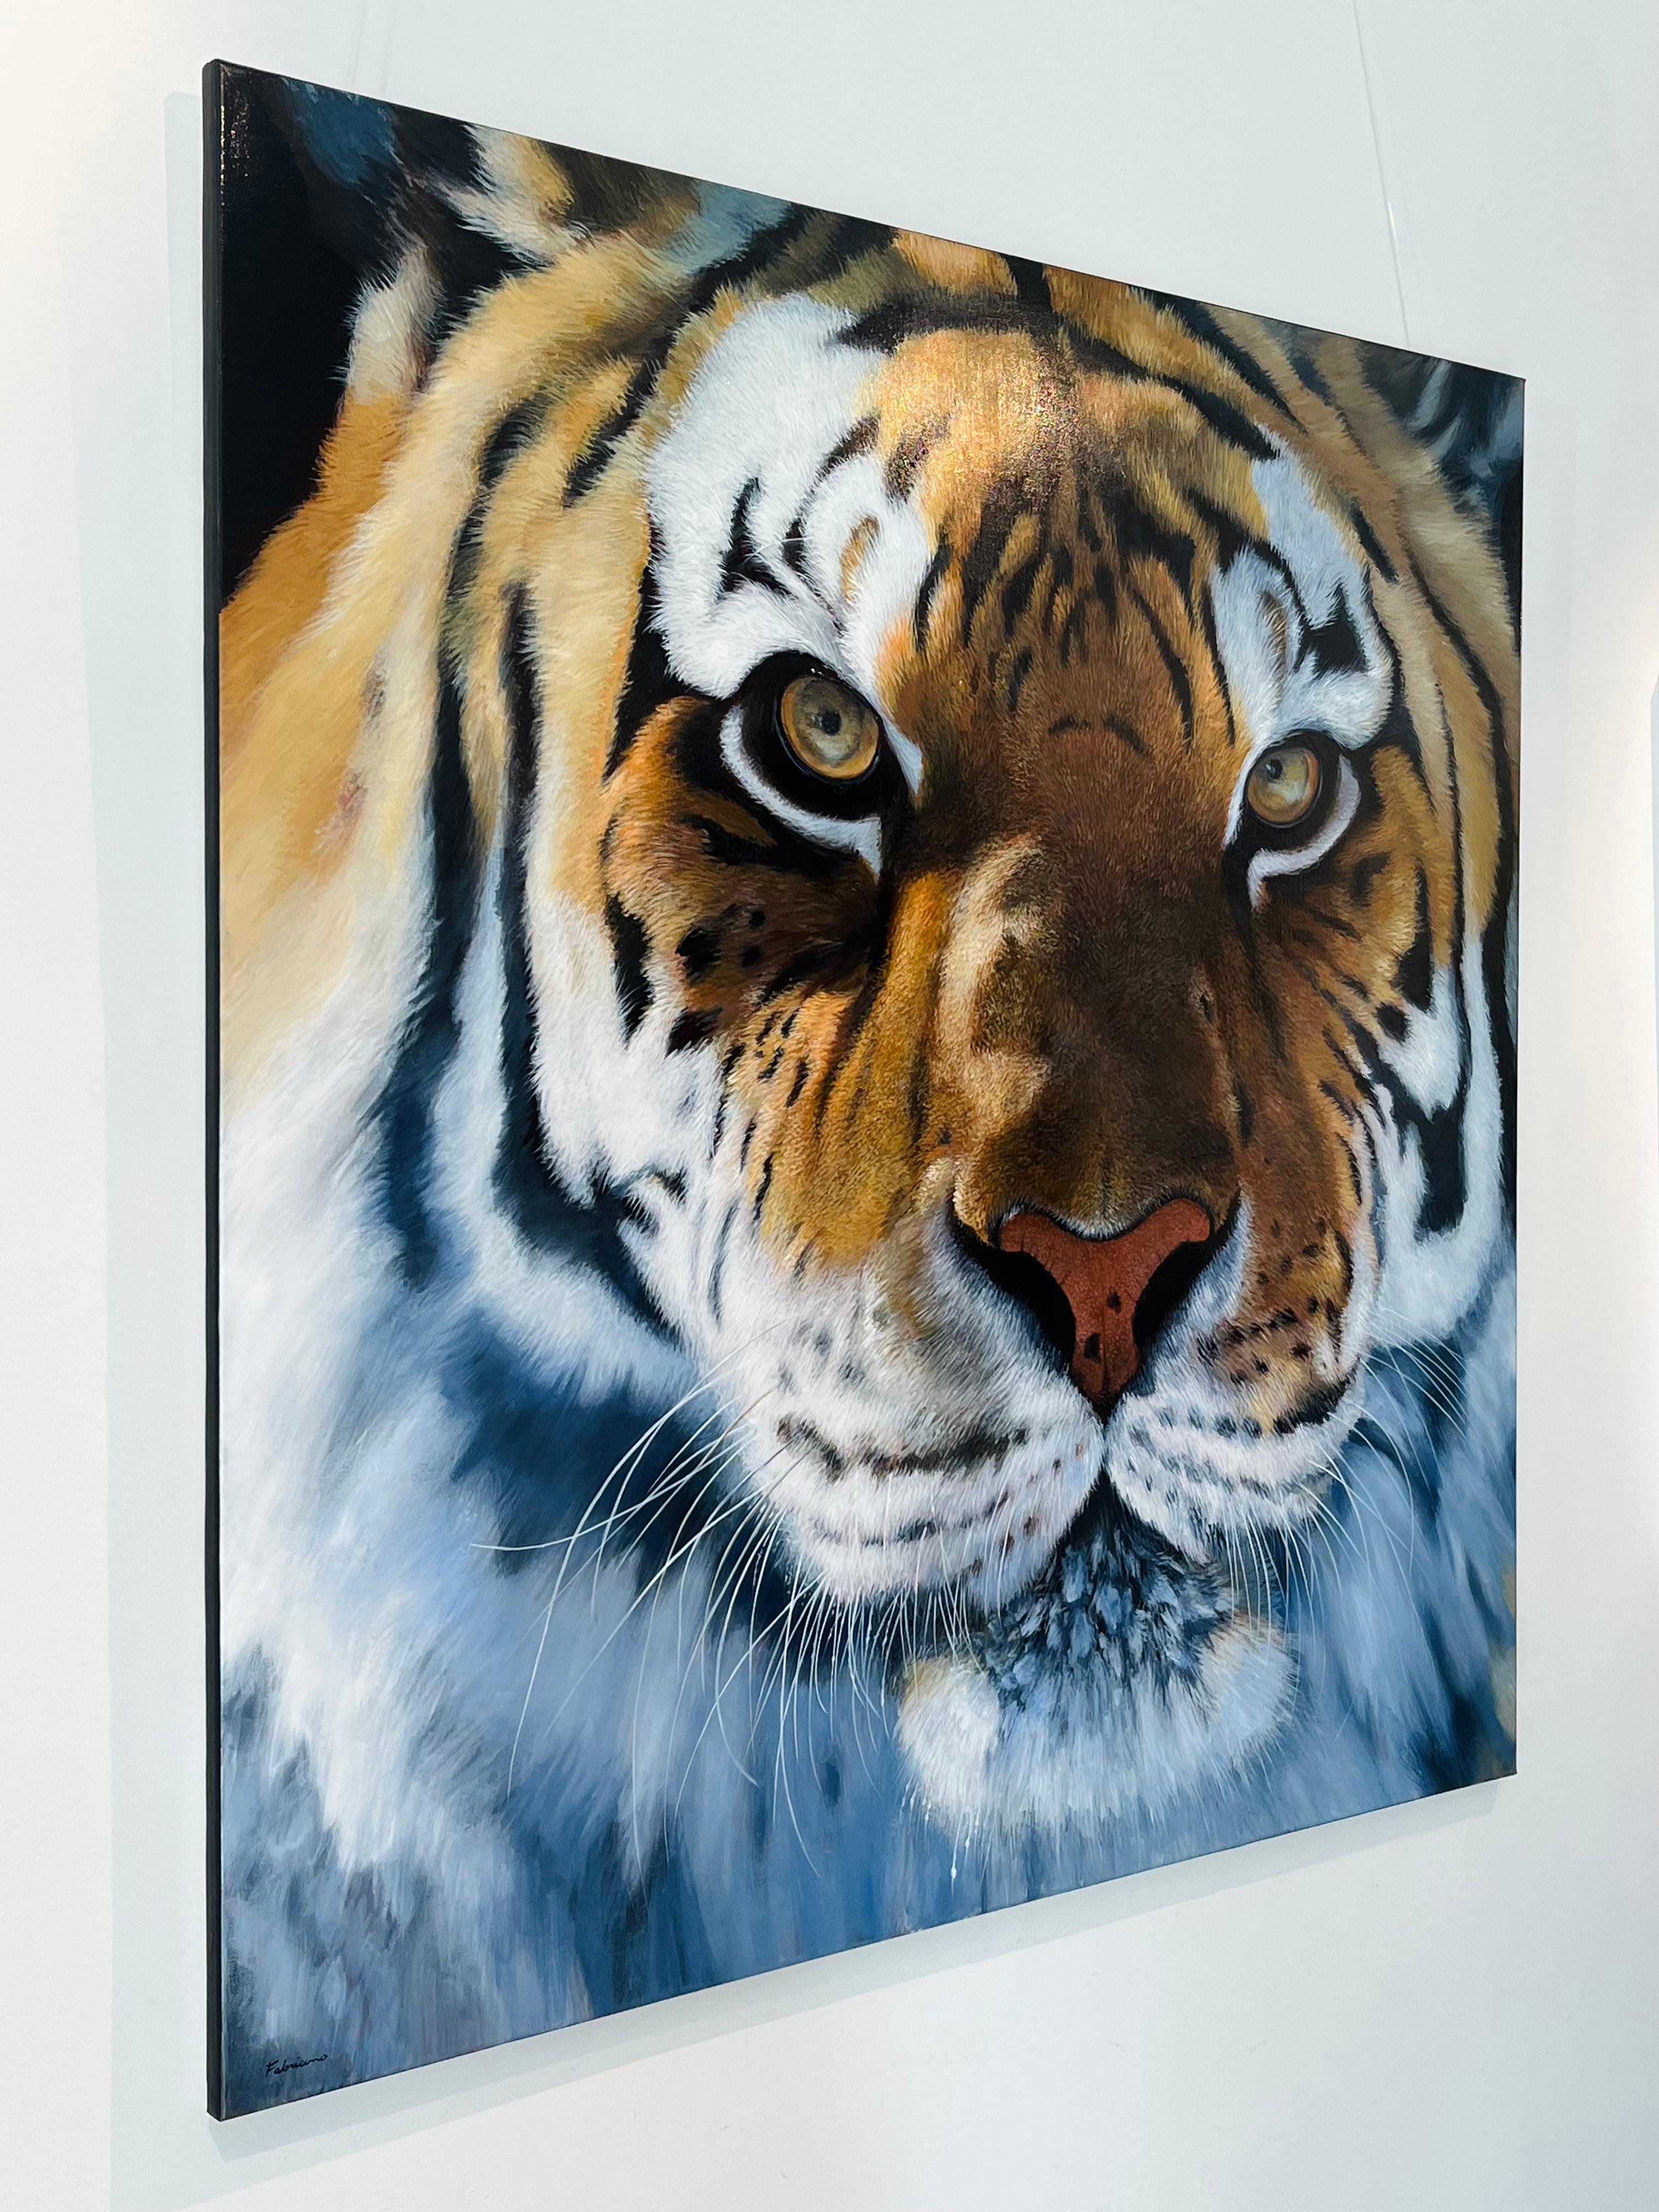 Siberian Tiger I-original photo realism wildlife oil painting-contemporary Art - Painting by Fabriano